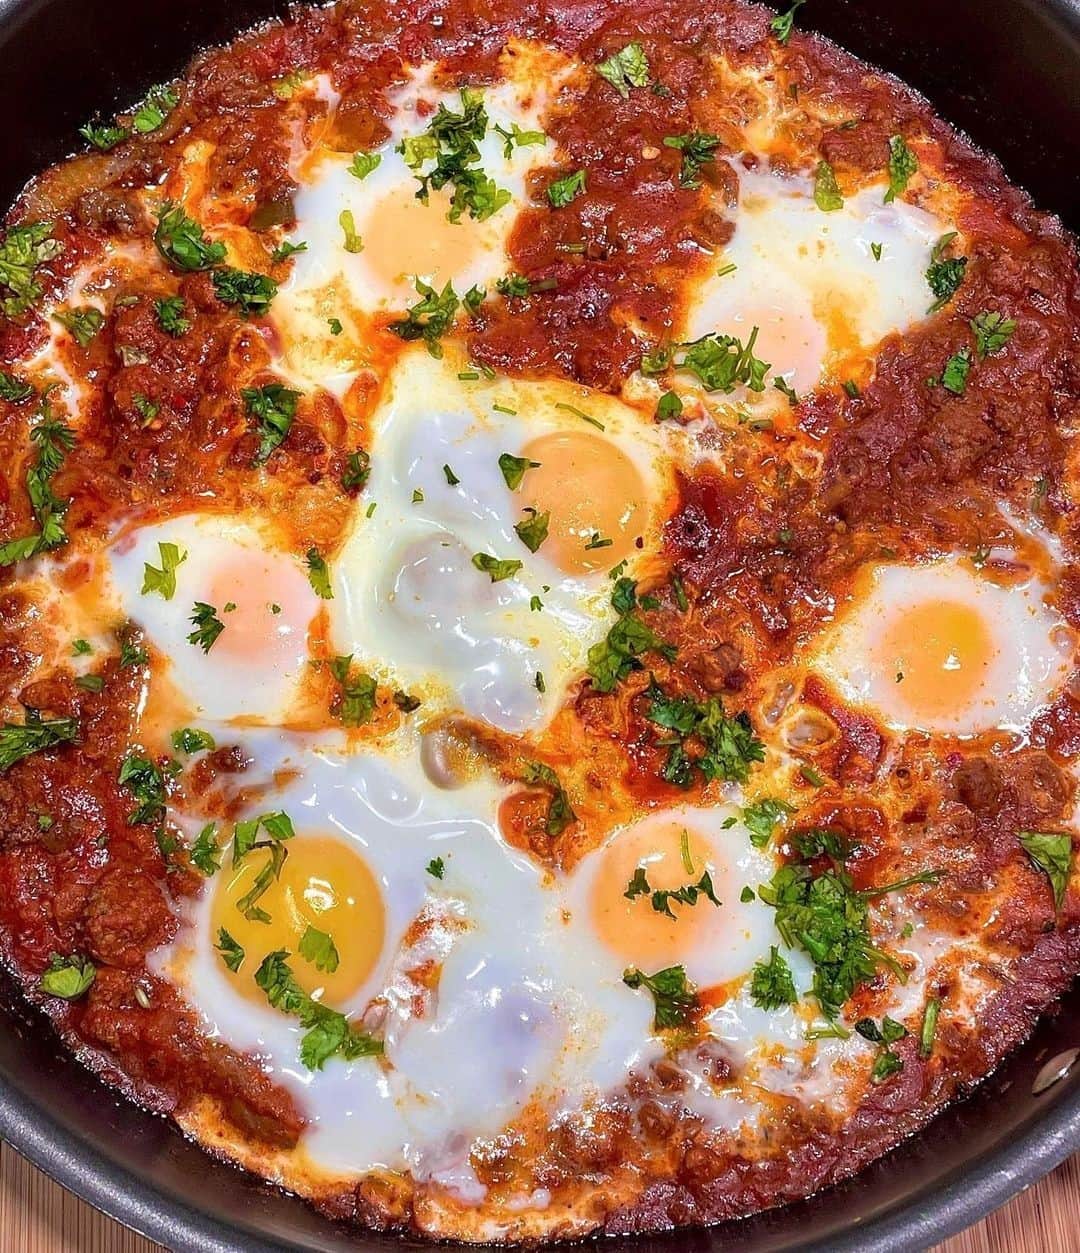 Flavorgod Seasoningsさんのインスタグラム写真 - (Flavorgod SeasoningsInstagram)「Beefed up Shakshuka by @_dashofhappiness_⁠ -⁠ Seasoned with Flavor God Everything Spicy Seasoning⁠ -⁠ Add delicious flavors to your meals!⬇️⁠ Click link in the bio -> @flavorgod  www.flavorgod.com⁠ -⁠ "🌟 we were craving our usual Moroccan meatball Tagine but i didn’t feel like making the meatballs so it turned to just ground beef, pepper, delicious spices, & herbs in a savory tomato sauce (basically a traditional Shakshuka with added beef) - It was SUCH a delicious easy quick meal: one pan & quick cleanup. Served it with some low carb toasted bread and that was it!"⁠ ⁠ Make it for breakfast, lunch or dinner!😍⁠ .⁠ .⁠ INGREDIENTS (serves 2-4)⁠ * 1 pound ground beef⁠ * 1 yellow onion, sliced thin⁠ * 1/2 red bell pepper & 1/2 green pepper (diced)⁠ * 5 garlic cloves, pressed or finely minced⁠ * 1 can peeled tomatoes⁠ * 1 1/2 tbs @flavorgod spicy everything seasoning (this seasoning has cumin, paprika,⁠ onion, garlic, cayenne, chili, black pepper, salt, basil & parsley - it’s the perfect all in one seasoning for this!)⁠ * 6 eggs⁠ * cilantro & parsley chopped to top⁠ * 1 tbs olive oil⁠ 🤍⁠ METHOD⁠ * heat oil and add onions to cook until translucent. Add in ground beef and crumble them up. Season with pinch of salt and pepper.⁠ * Add in peppers to cook. Once cooked slightly, add in your canned tomatoes, garlic, and your spice mix. Taste test and season with more salt & pepper if needed. Stir & let simmer about 10mins over medium heat⁠ * Make 6 small wells in the mixture and crack your eggs. Cover to let the eggs cook. Leave lid slightly open to keep the eggs sunny side up if you wish and from overcooking⁠ * Once eggs are cooked season with a pinch of black pepper, top with cilantro & parsley!⁠ -⁠ Flavor God Seasonings are:⁠ ✅ZERO CALORIES PER SERVING⁠ ✅MADE FRESH⁠ ✅MADE LOCALLY IN US⁠ ✅FREE GIFTS AT CHECKOUT⁠ ✅GLUTEN FREE⁠ ✅#PALEO & #KETO FRIENDLY⁠ -⁠ #food #foodie #flavorgod #seasonings #glutenfree #mealprep #seasonings #breakfast #lunch #dinner #yummy #delicious #foodporn」1月13日 22時01分 - flavorgod